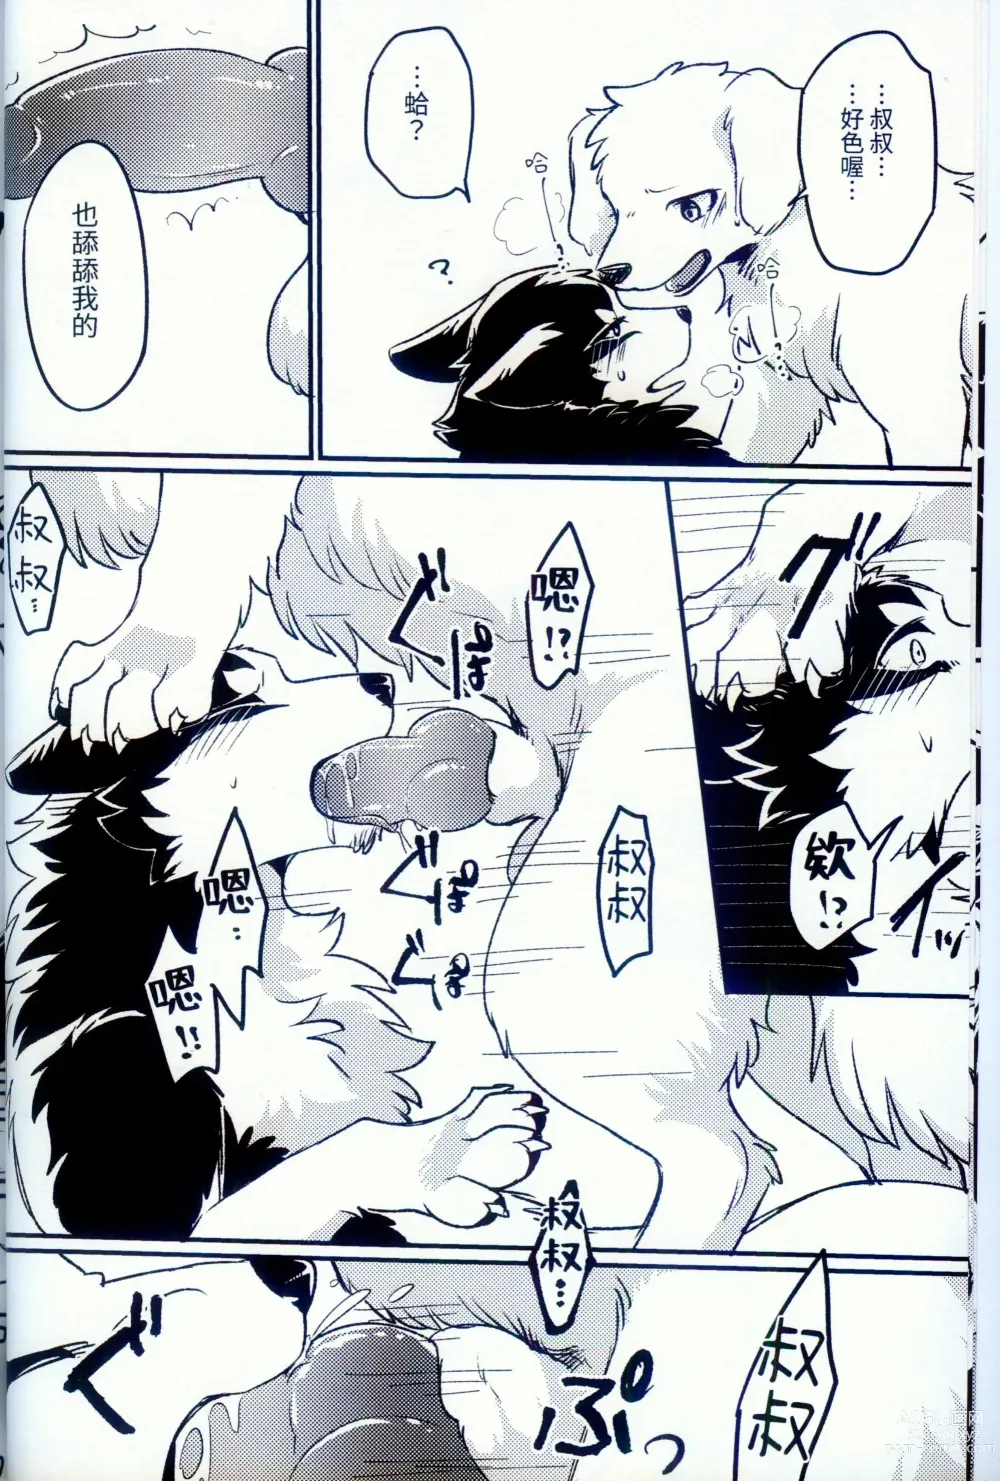 Page 7 of doujinshi More,more,MORE! (decensored)